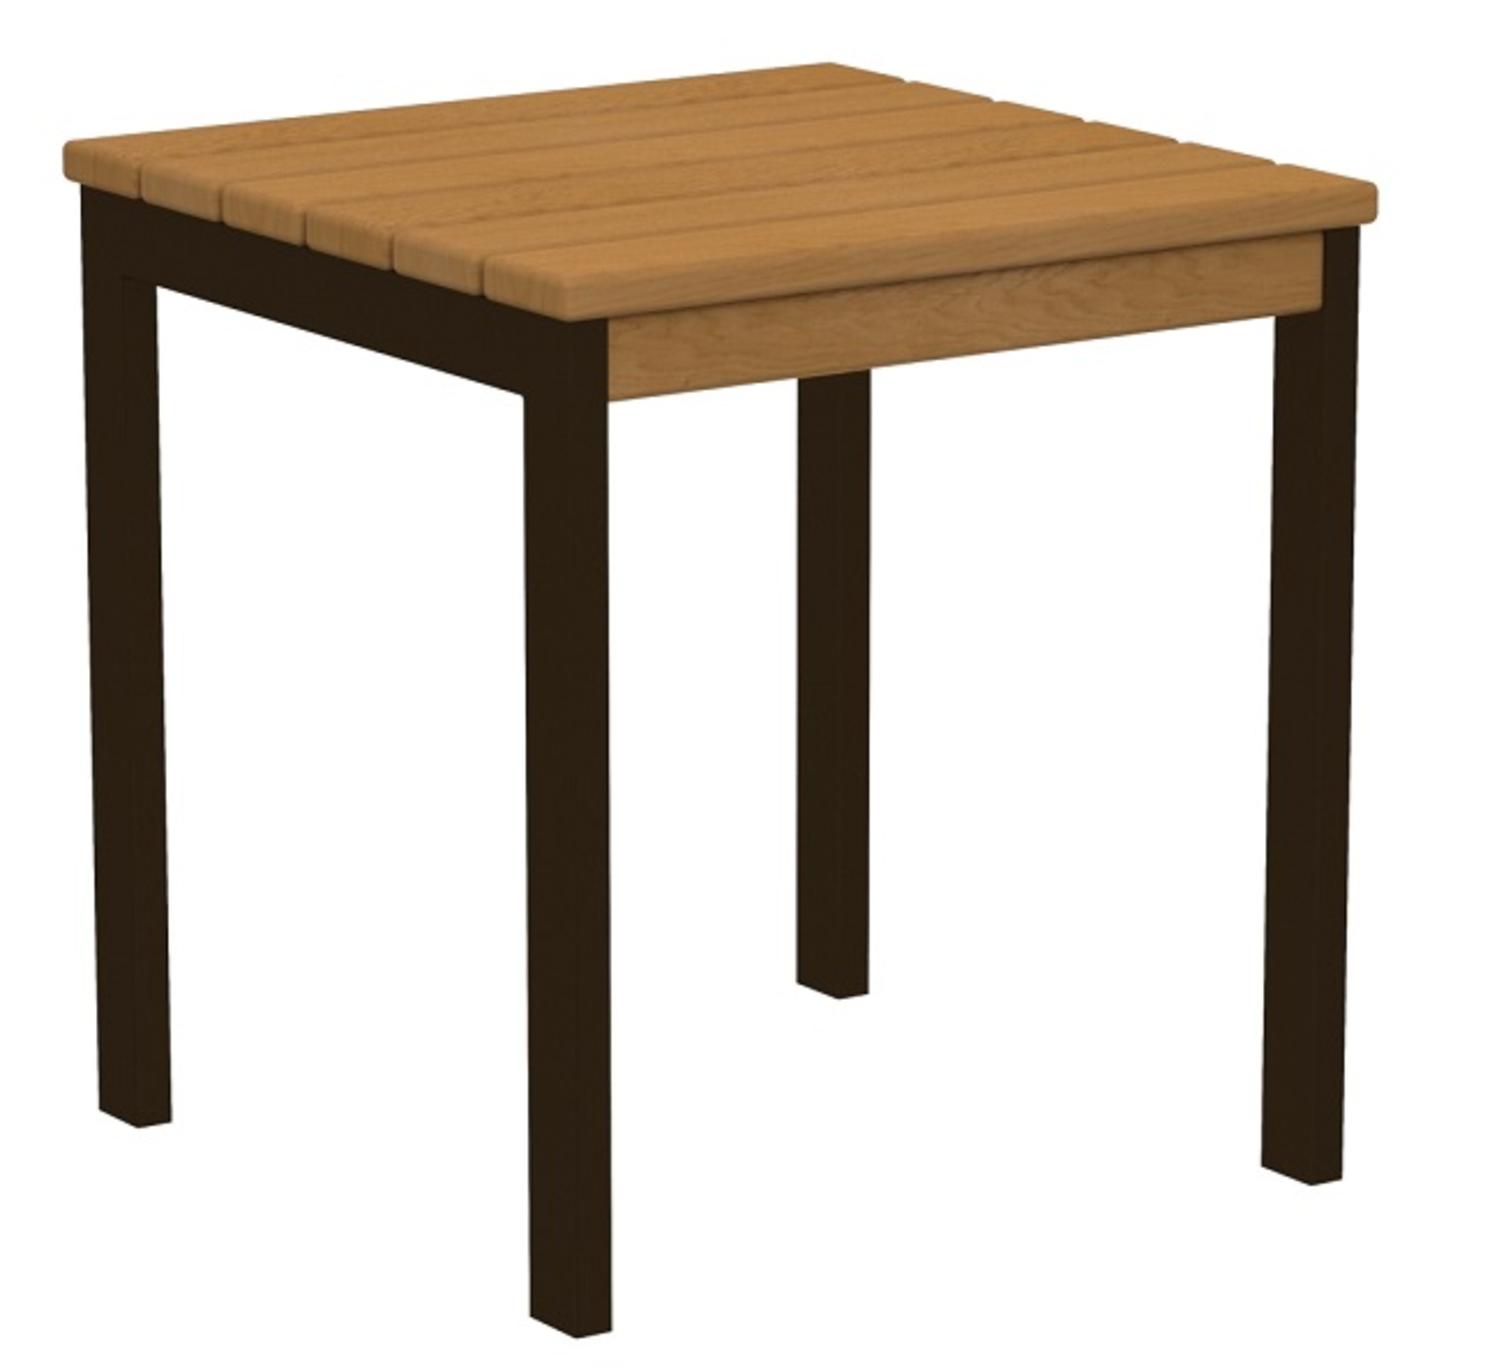 Eco-Friendly Furnishings  18" Outdoor Patio Square Side Table - Natural Teak Brown with Bronze Frame